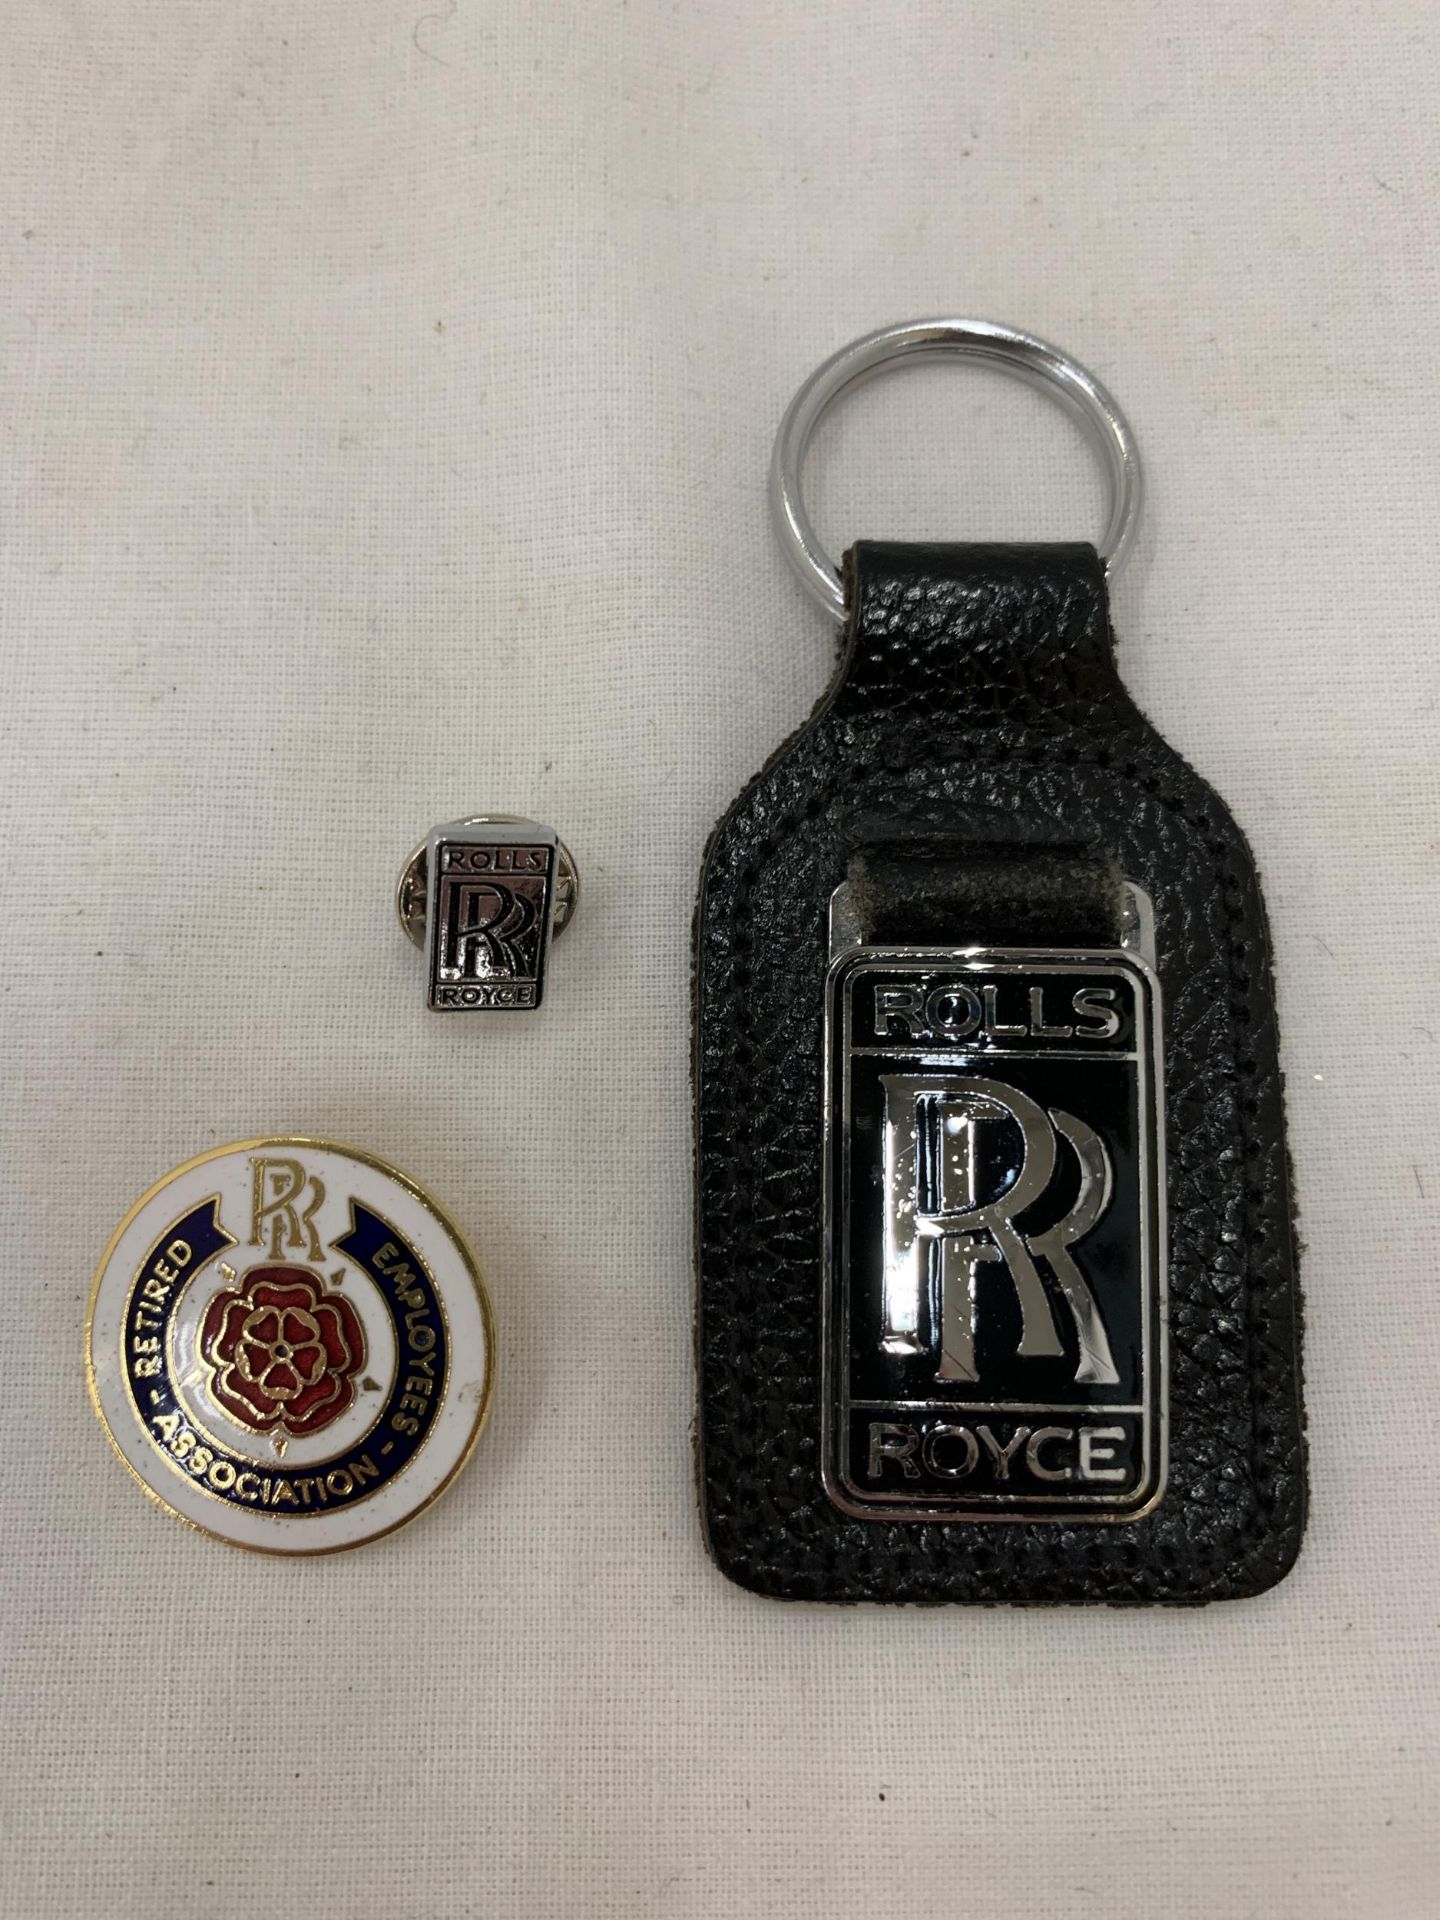 TWO ROLLS ROYCE BADGES AND A KEY FOB - Image 2 of 2